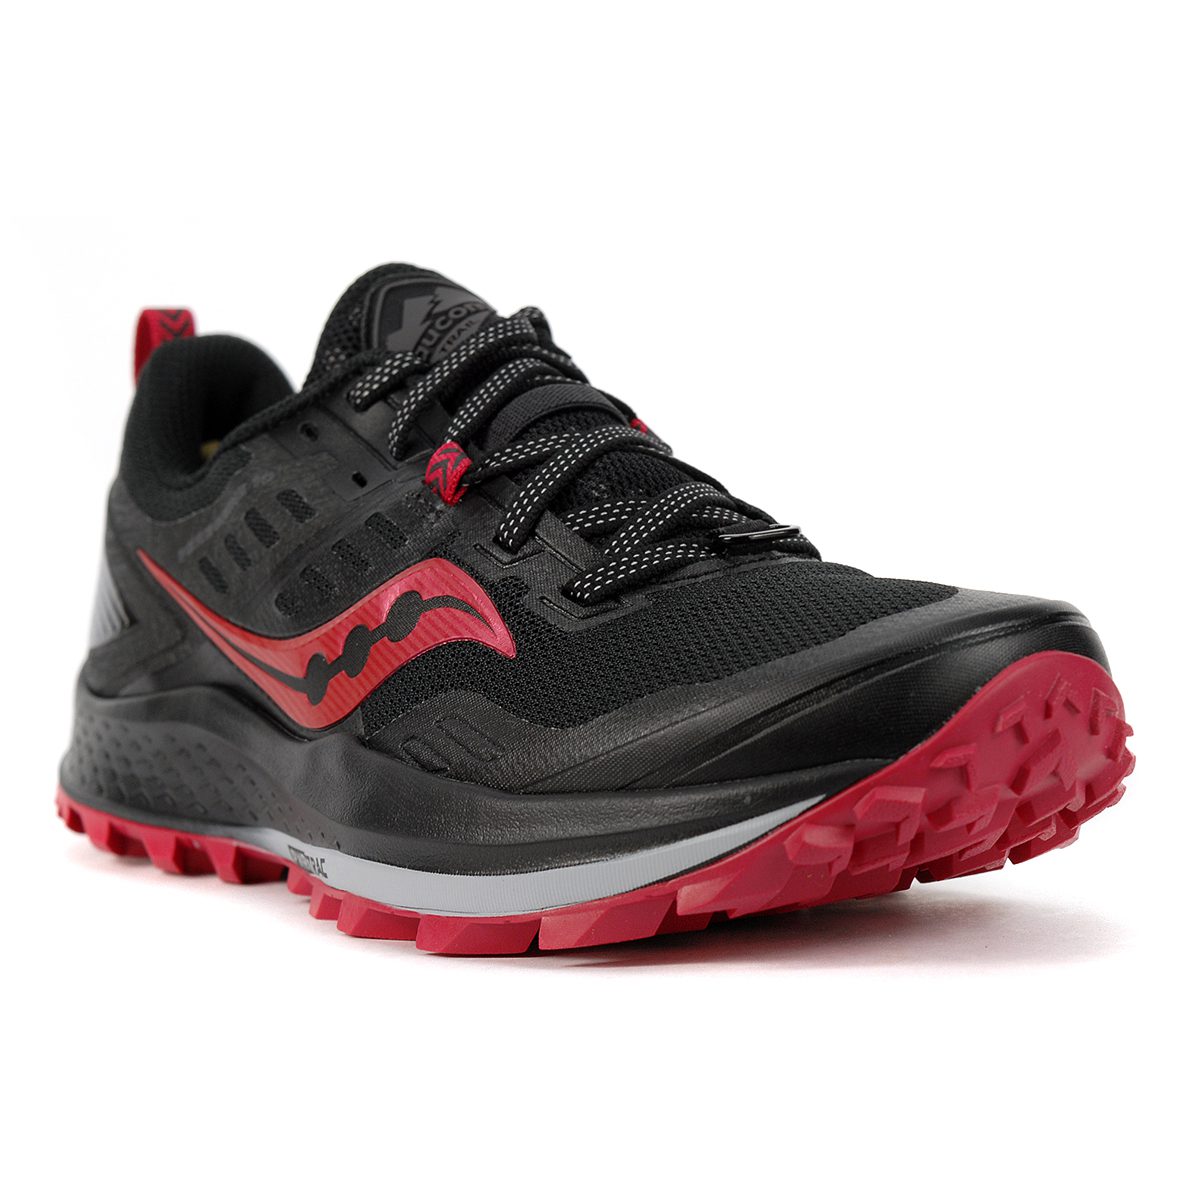 Black/Barberry Saucony Peregrine 10 Womens Trail Running Shoes 